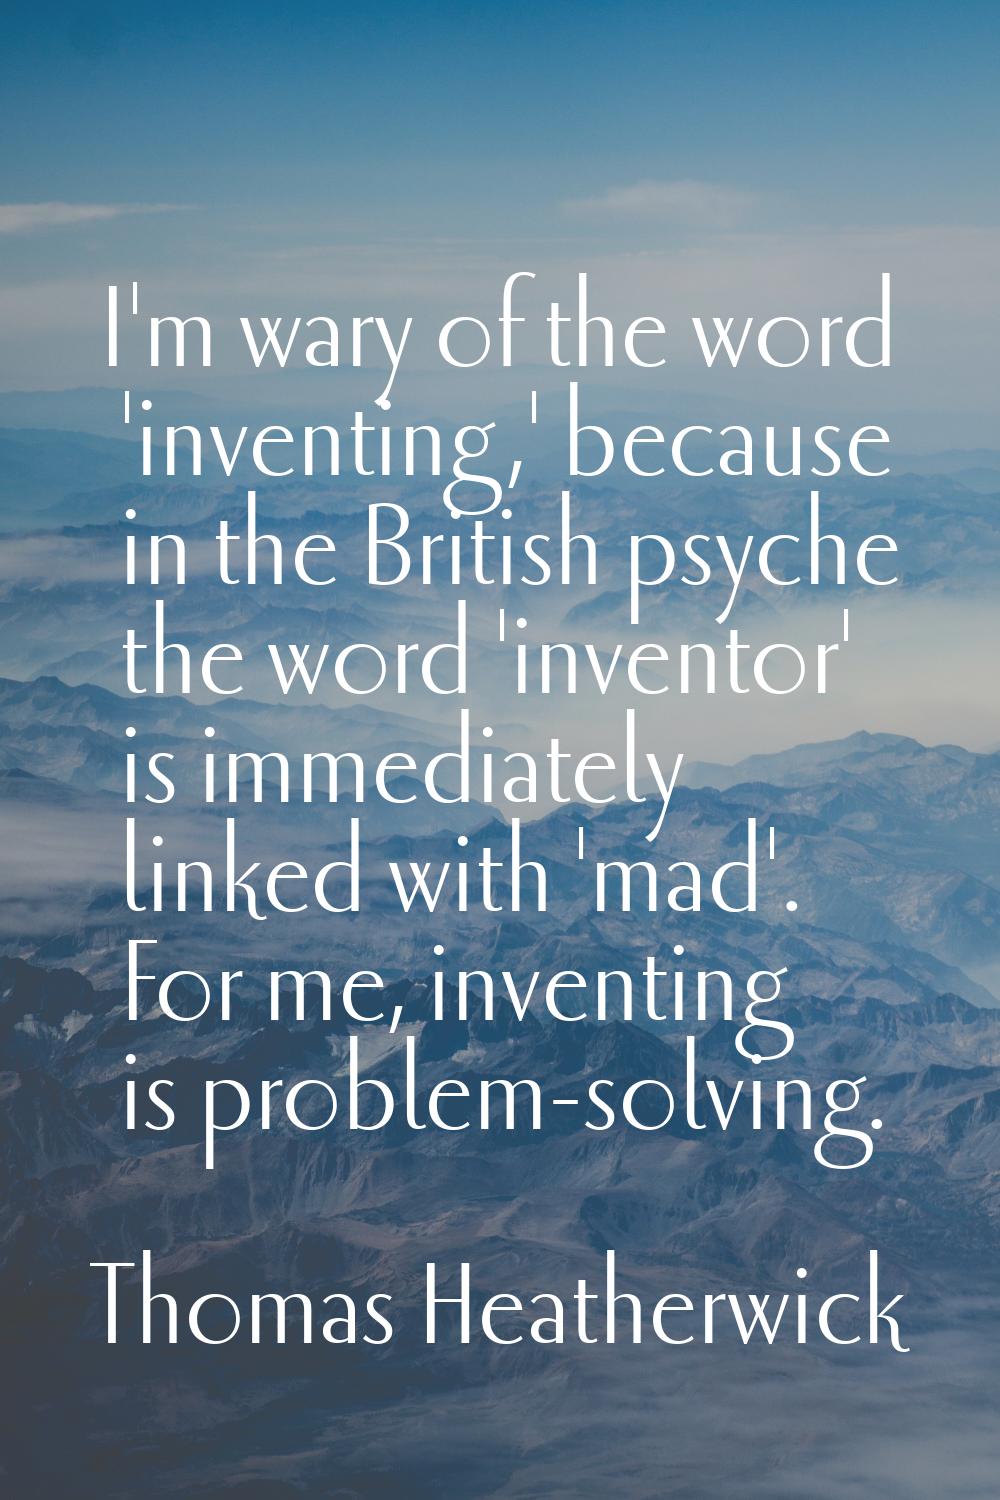 I'm wary of the word 'inventing,' because in the British psyche the word 'inventor' is immediately 